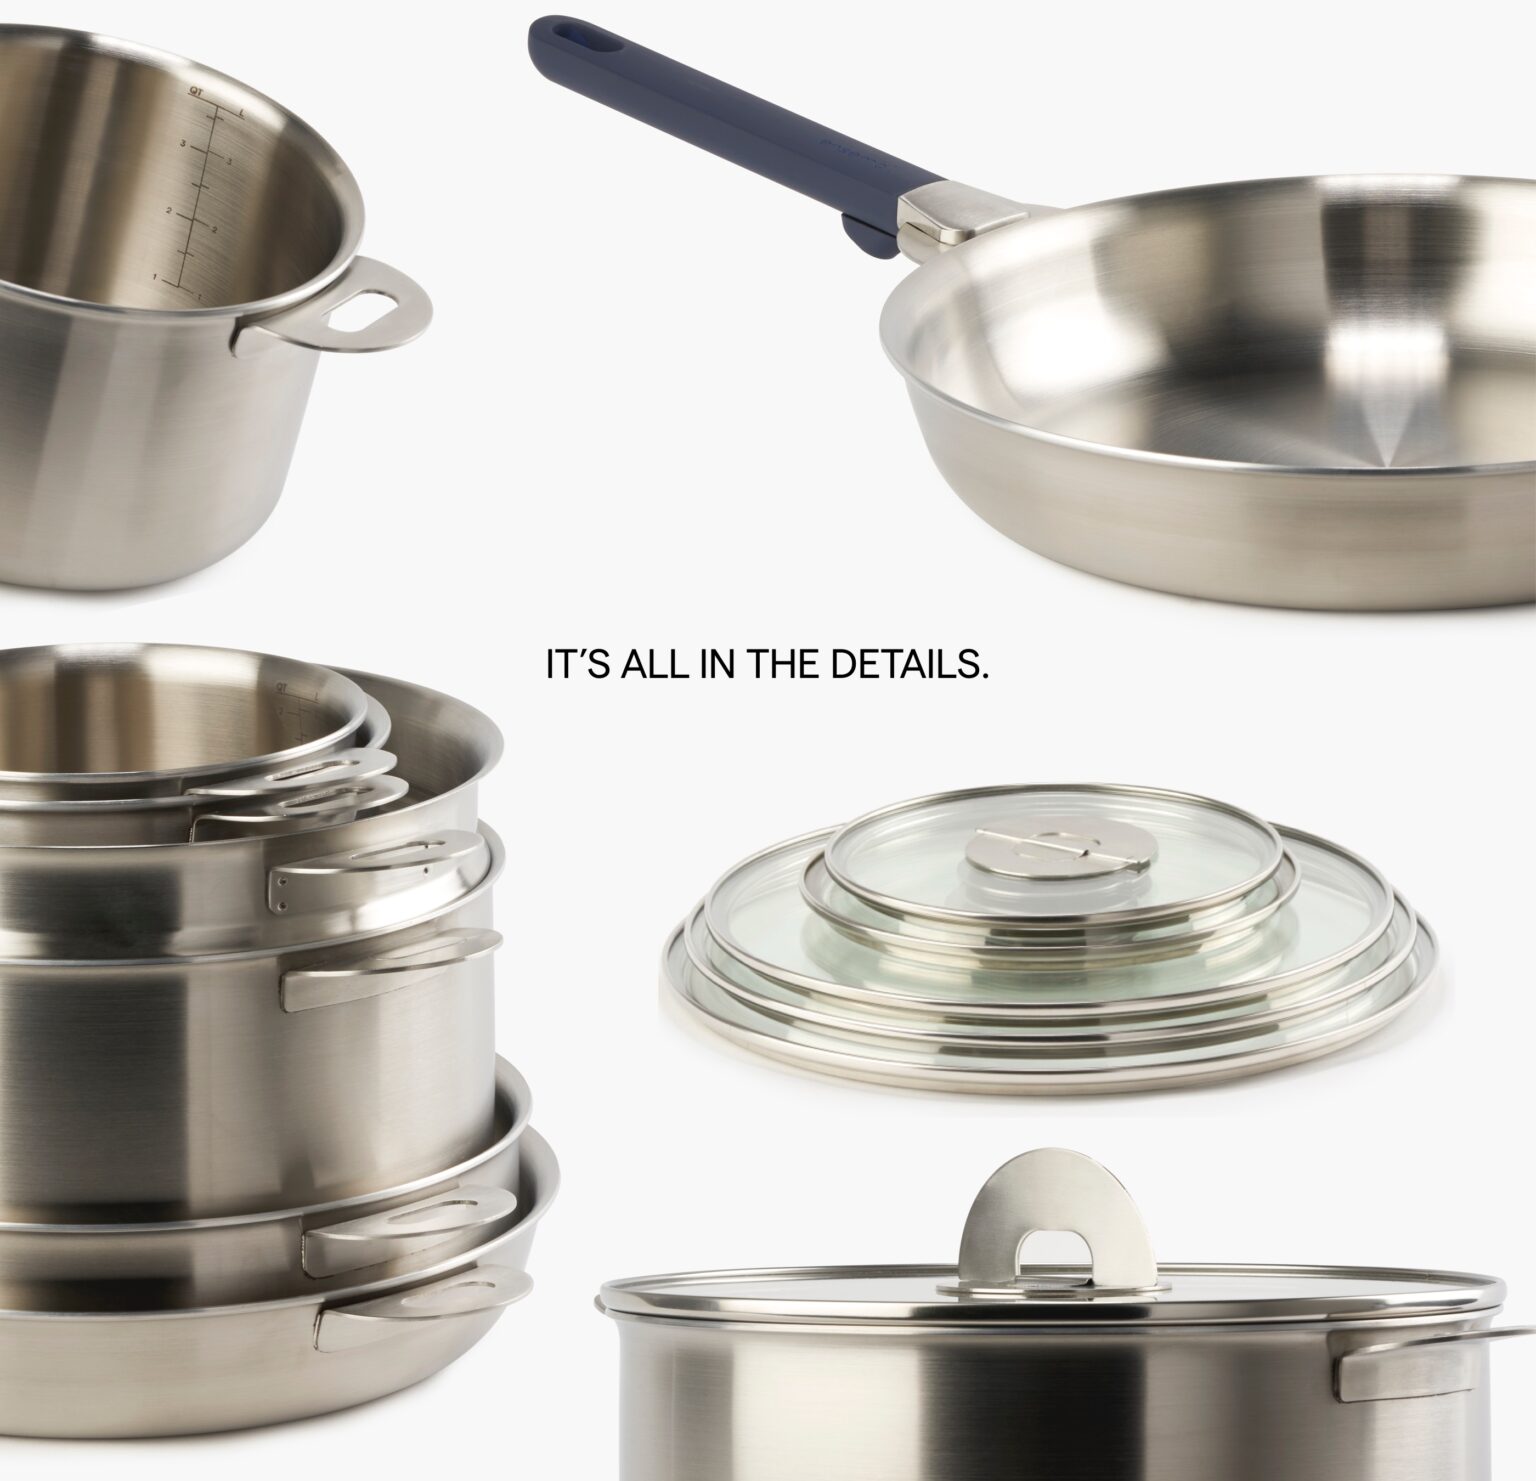 'LEARN MORE about ENSEMBL Stainless Steel Fully Clad Stacking Cookware Set with removable handles. Details engineered in the cookware set include Etched Volume Markings, Rivet-free interiors, Flat-lying glass lids, and Laser-welded Construction. Frying Pan, Braiser Pan, Small Saucepan, Medium Saucepan, Stockpot, Steamer/Colander. Multifunctional, long-lasting, design-forward home wares. Oven-safe cookware set. Induction-safe cookware set.